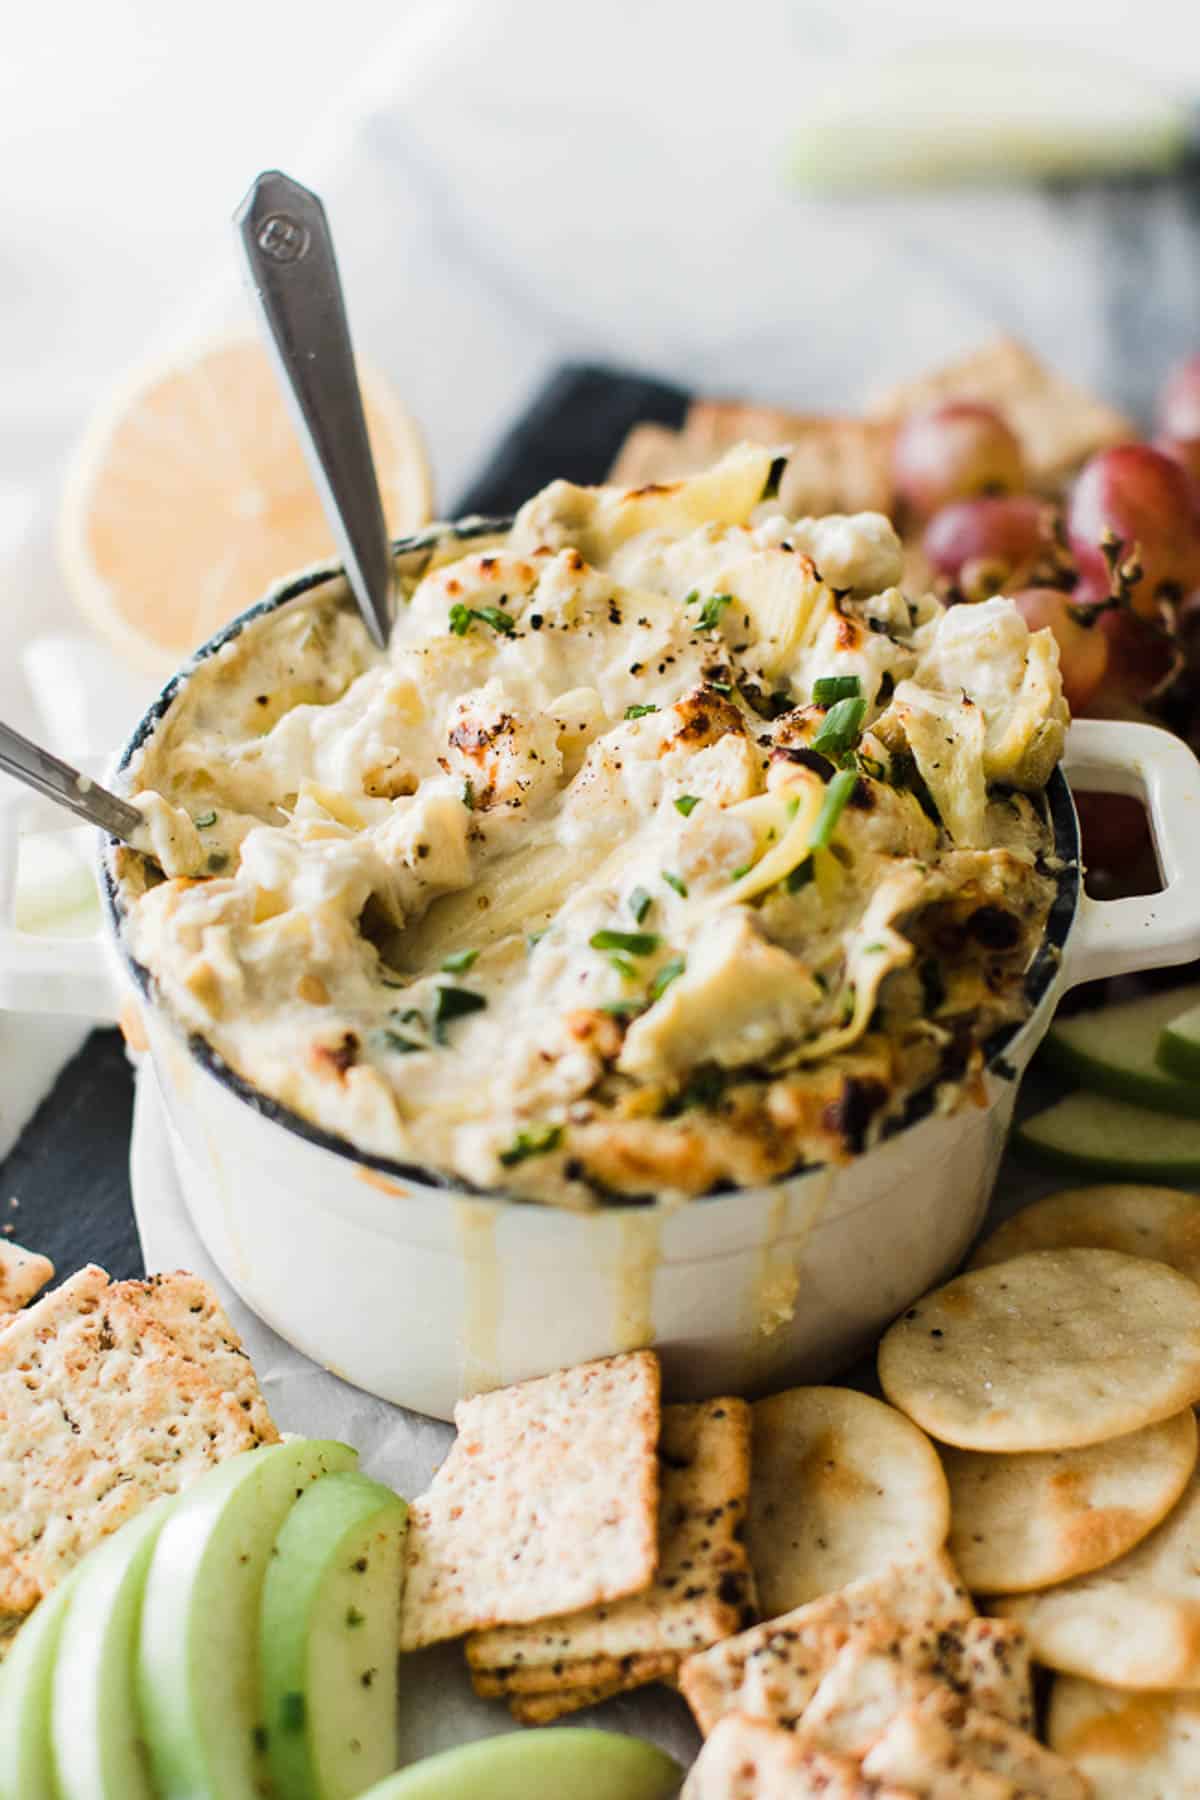 Bowl of green chile artichoke dip with spoons, crackers and fruit.